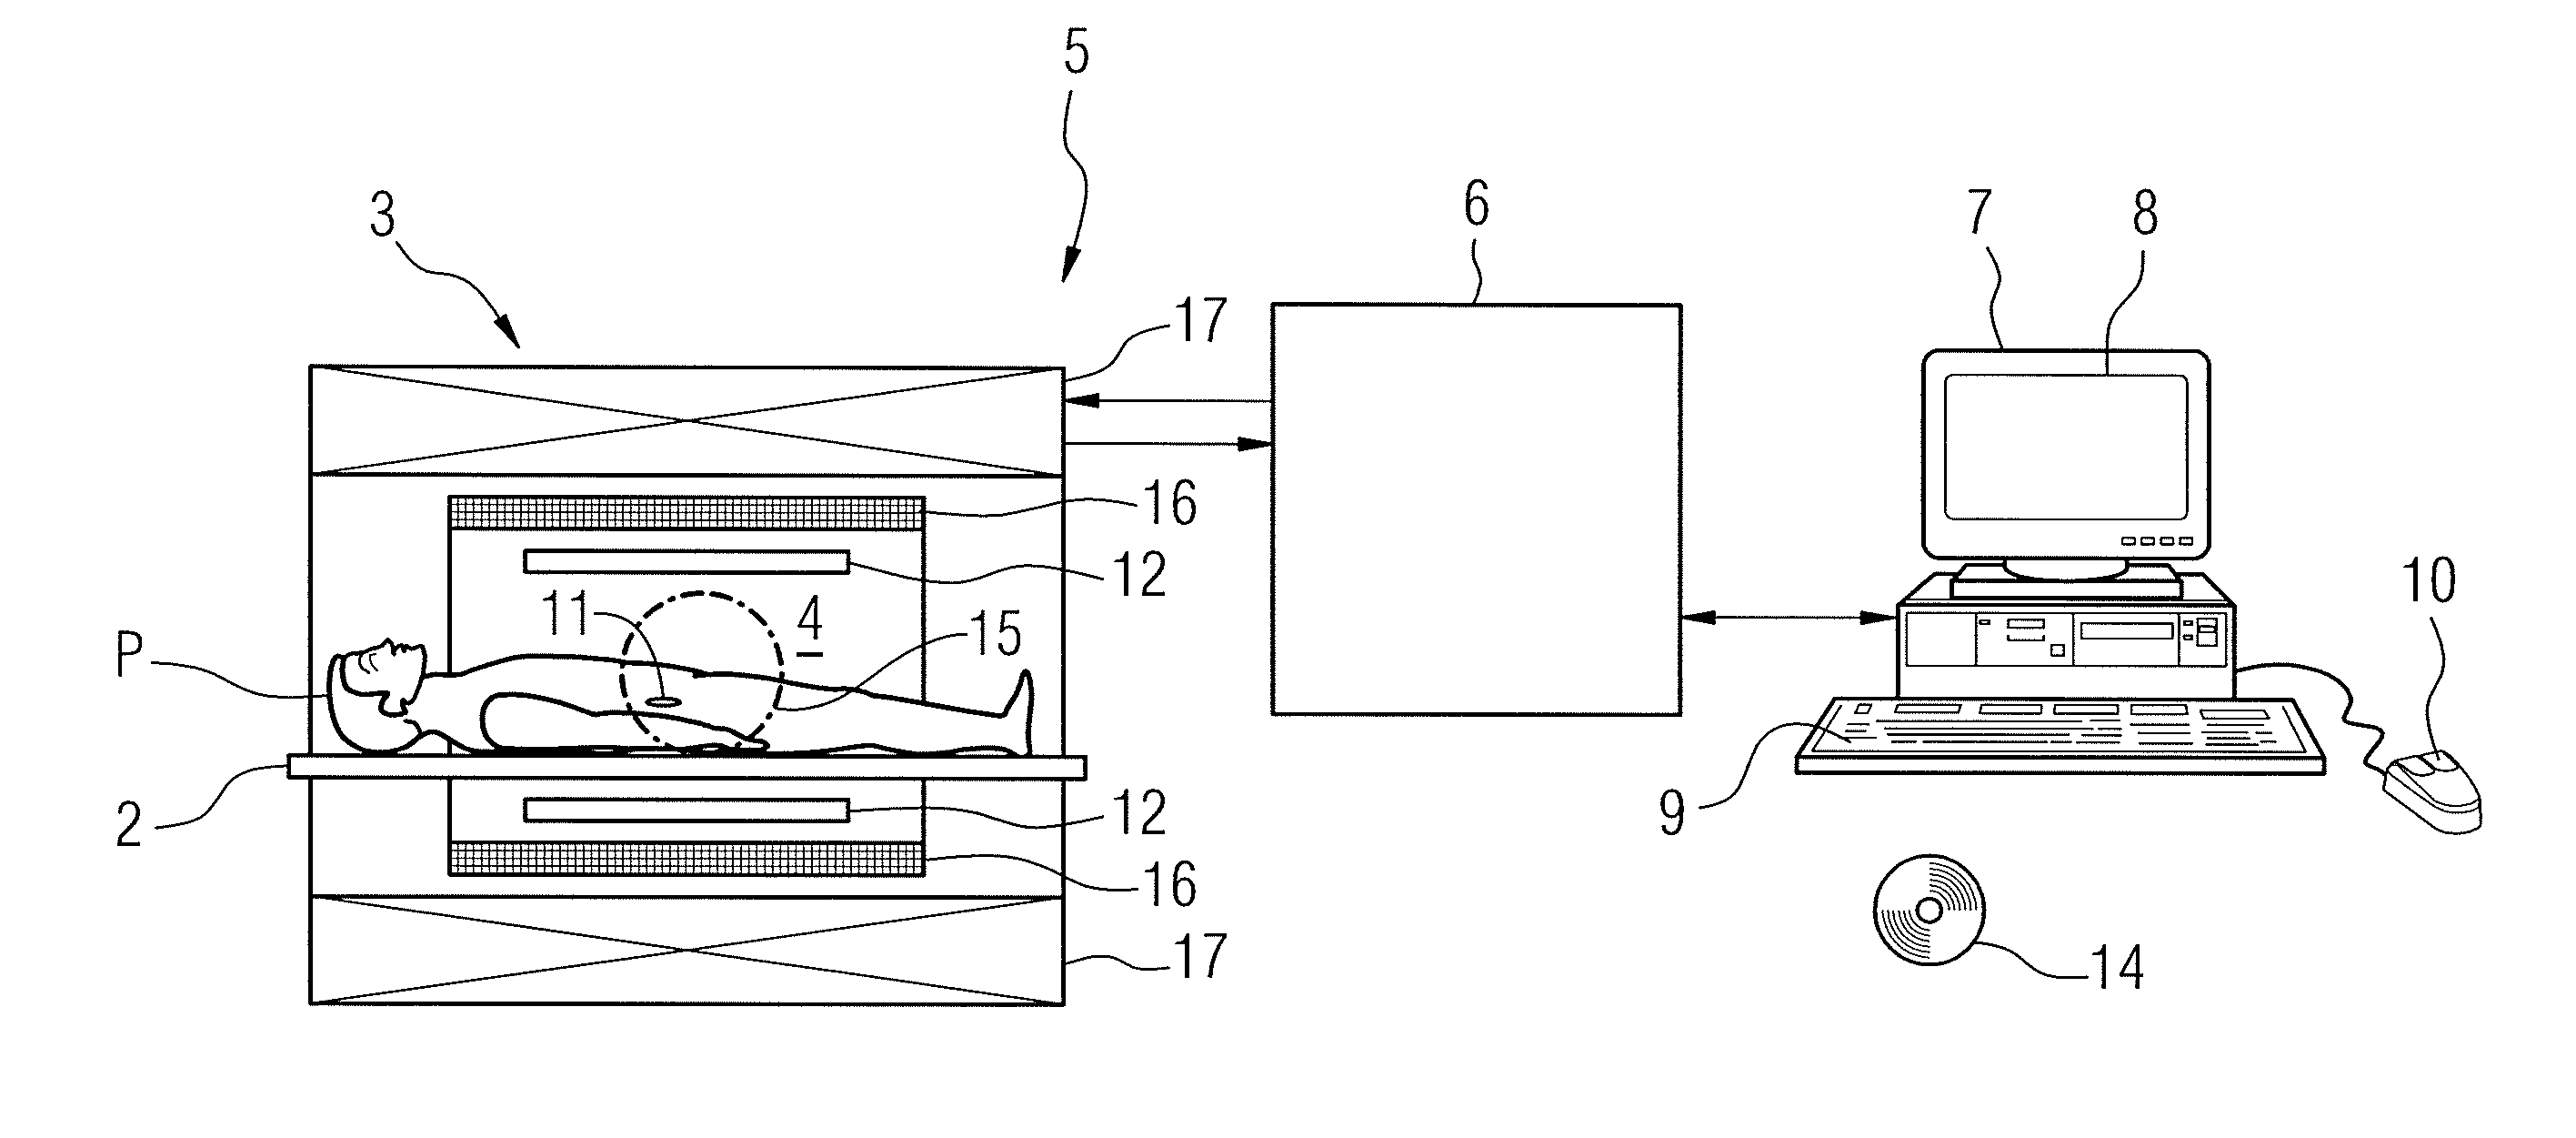 Method for generating a pulse sequence to acquire magnetic resonance data, and operating method and magnetic resonance system employing the generated pulse sequence